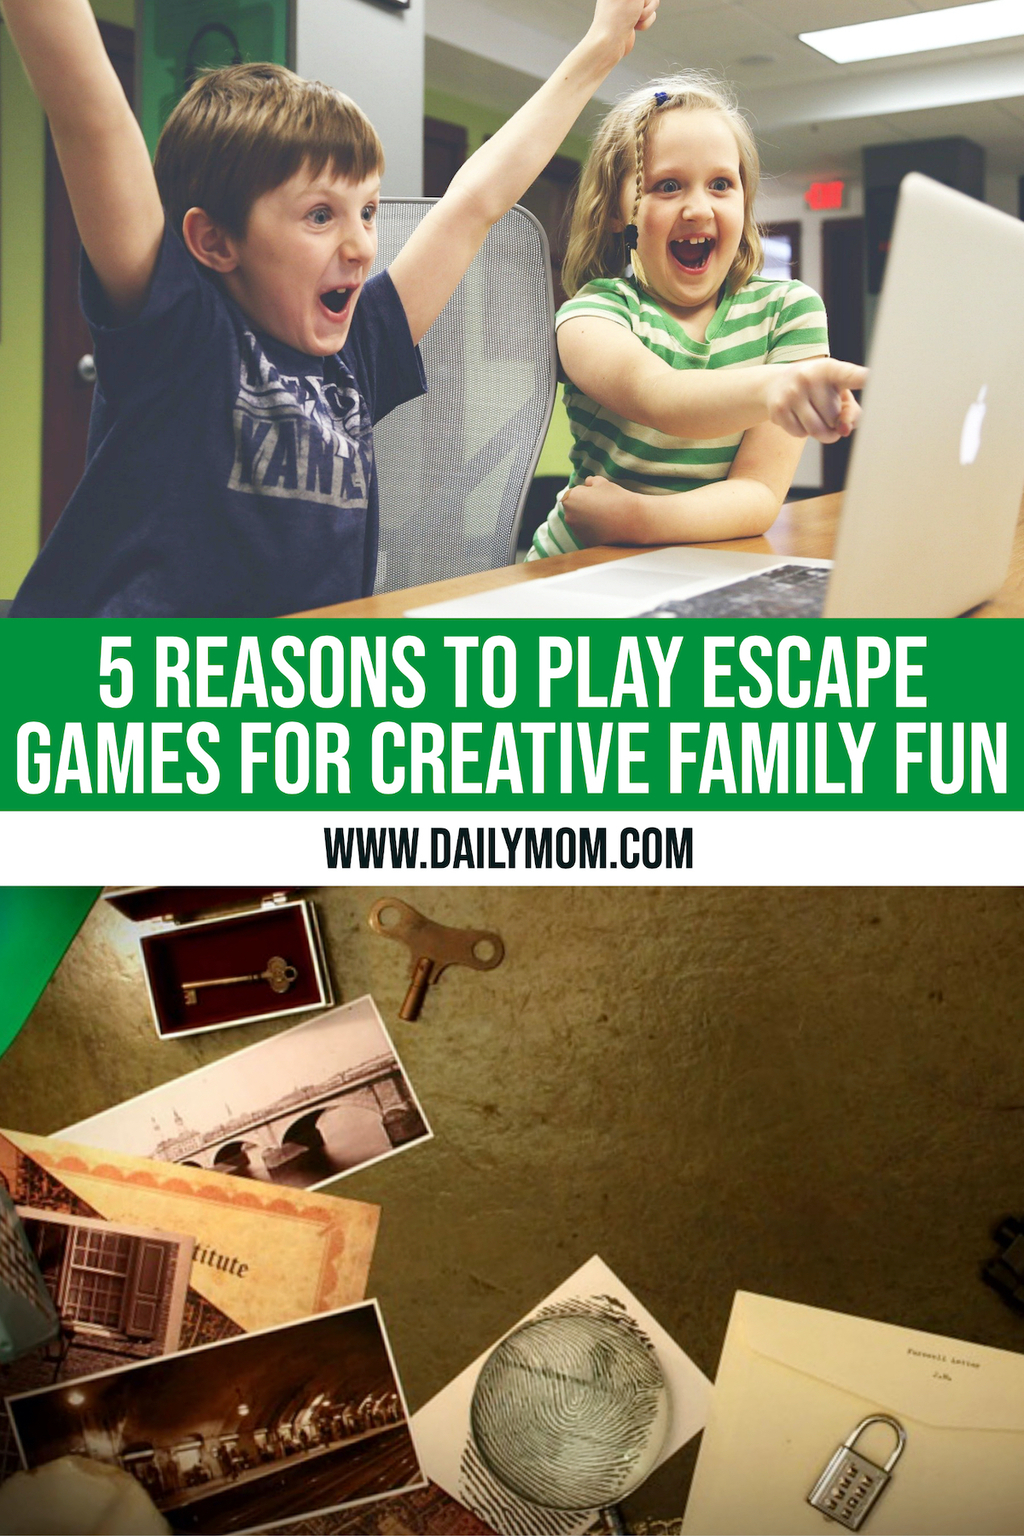 5 Reasons To Play Escape Games For Creative Family Fun